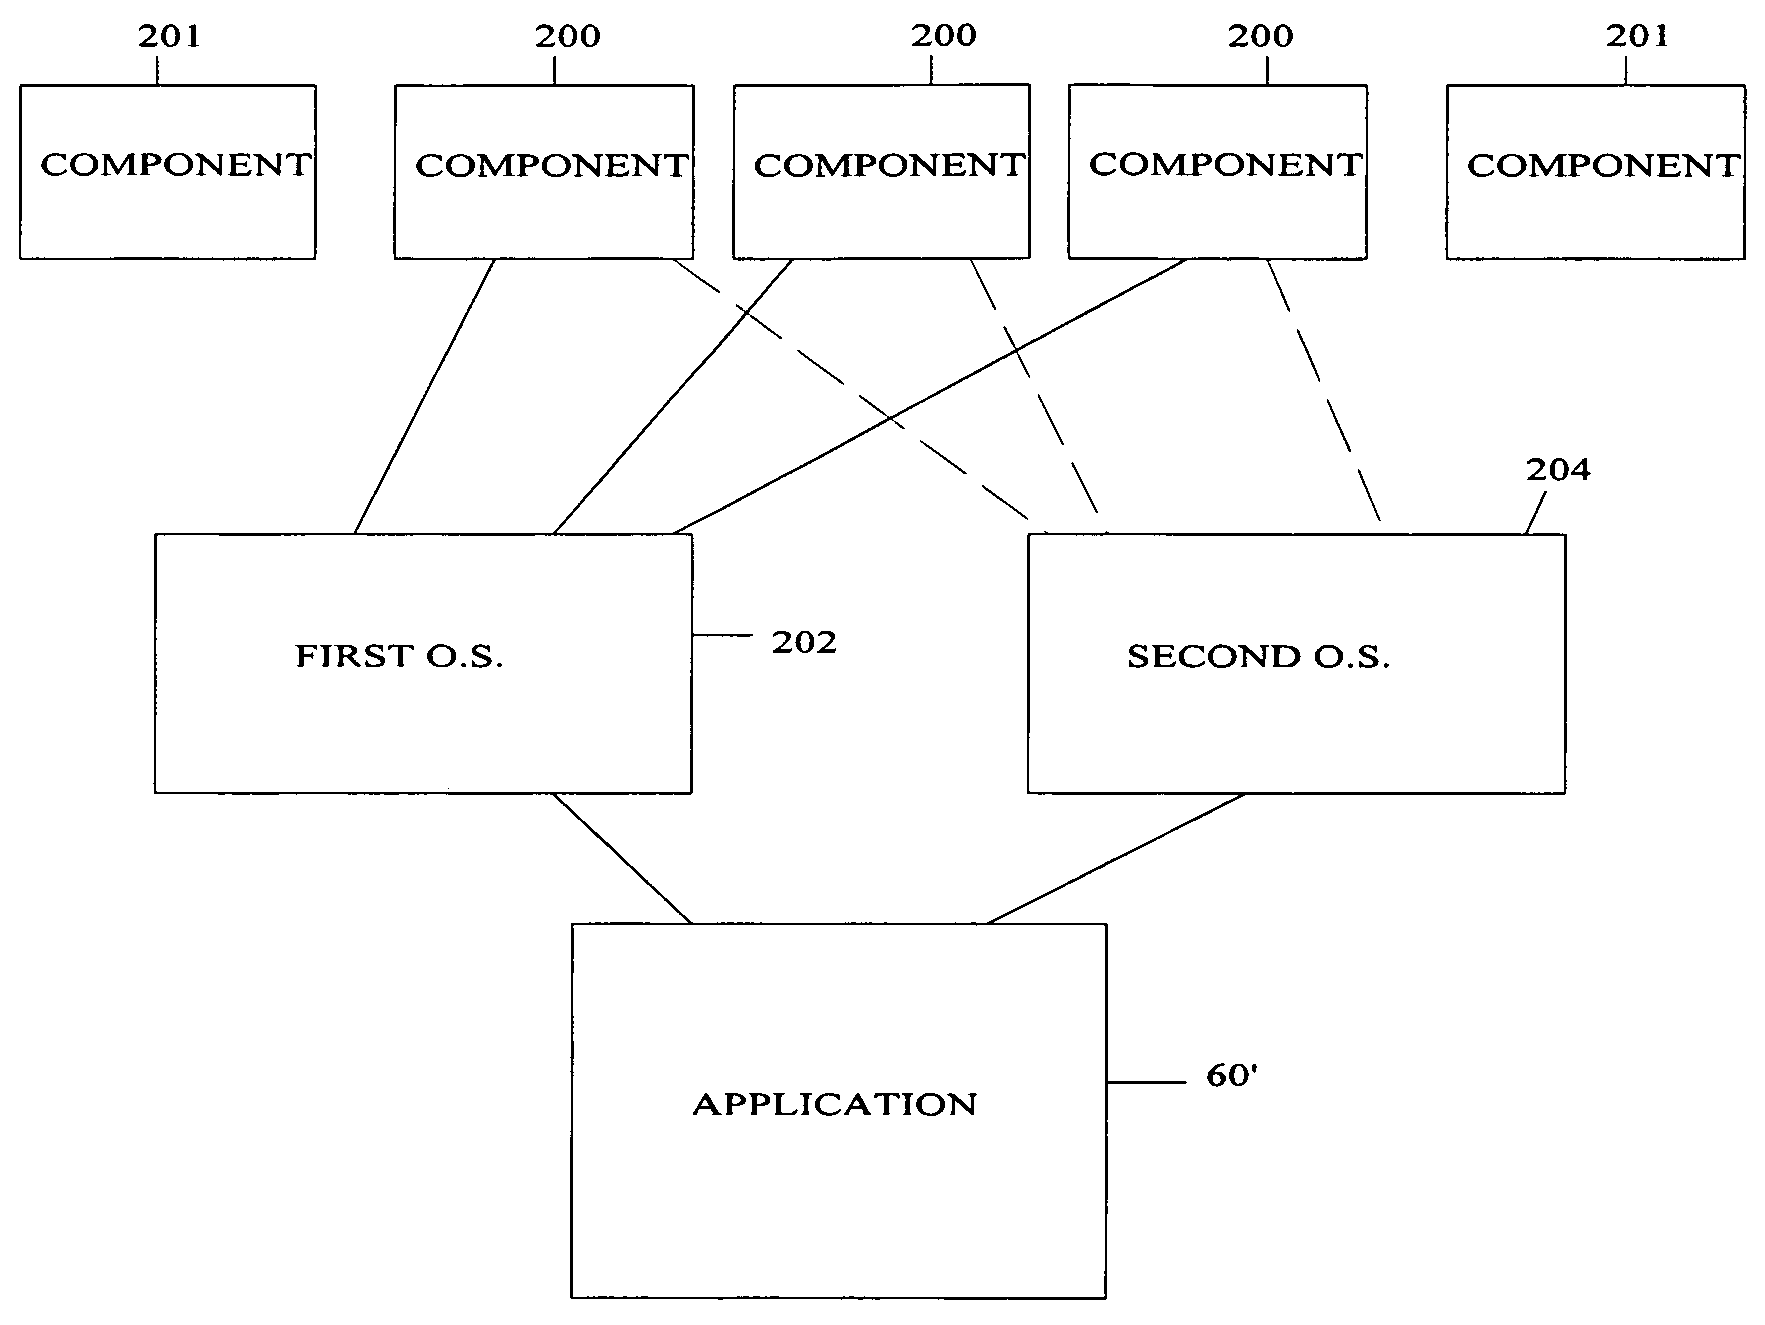 Configuration tool for building a user application for multiple operating systems